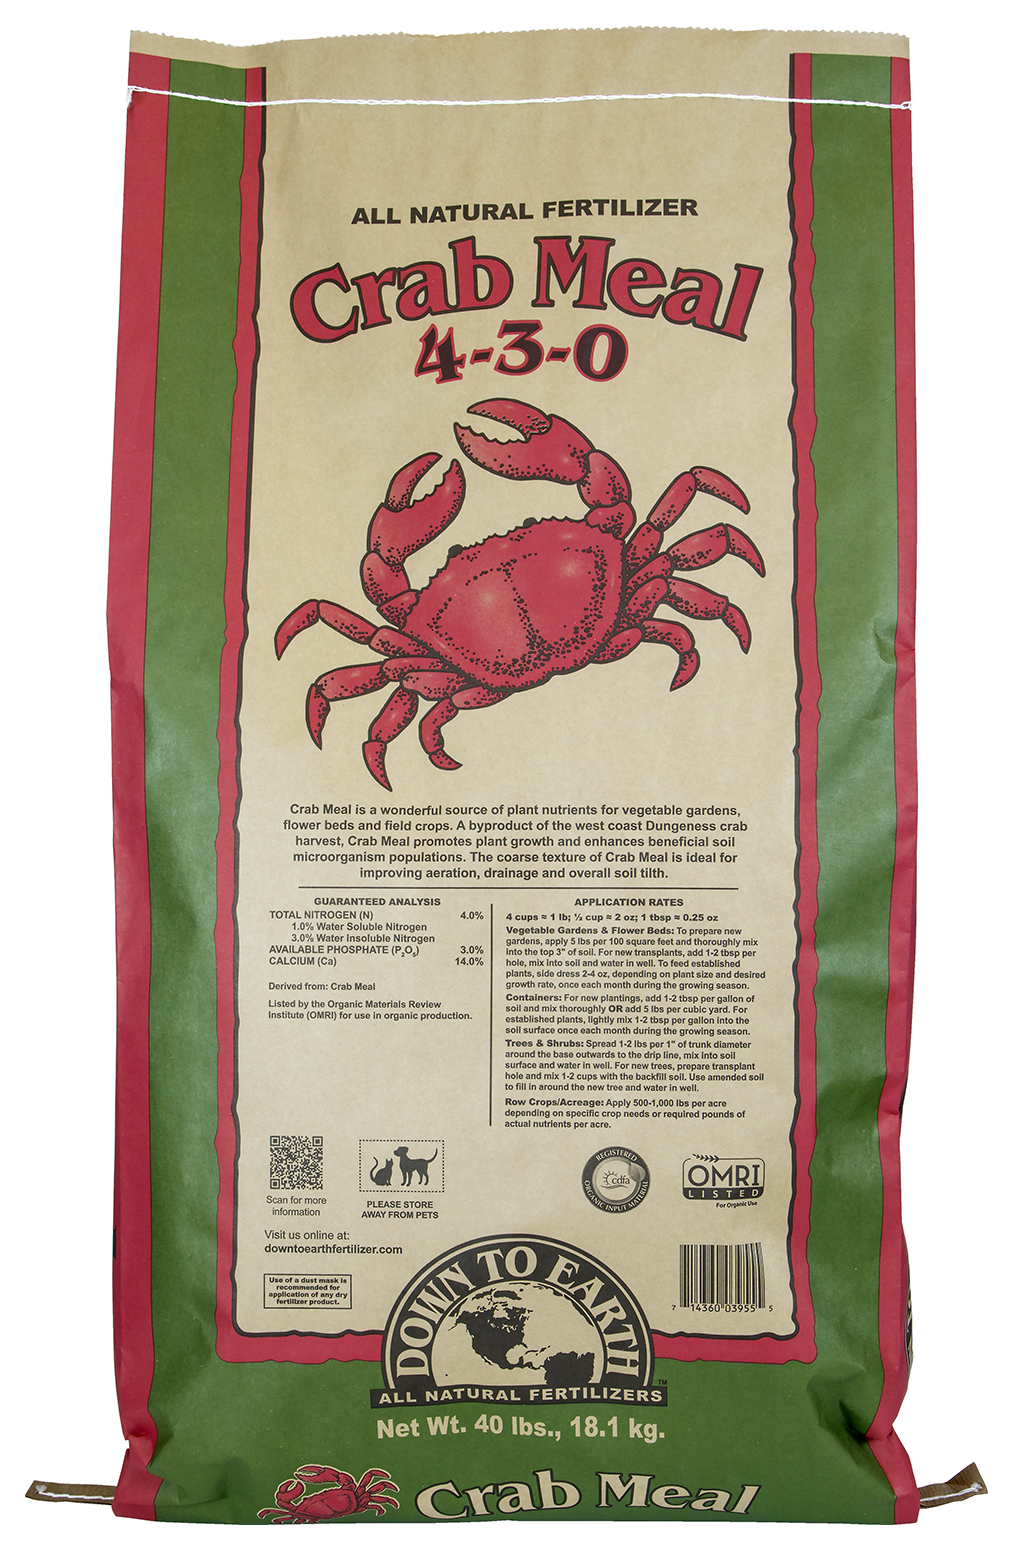 Down to Earth Crab Meal 4-3-0 40 lb.